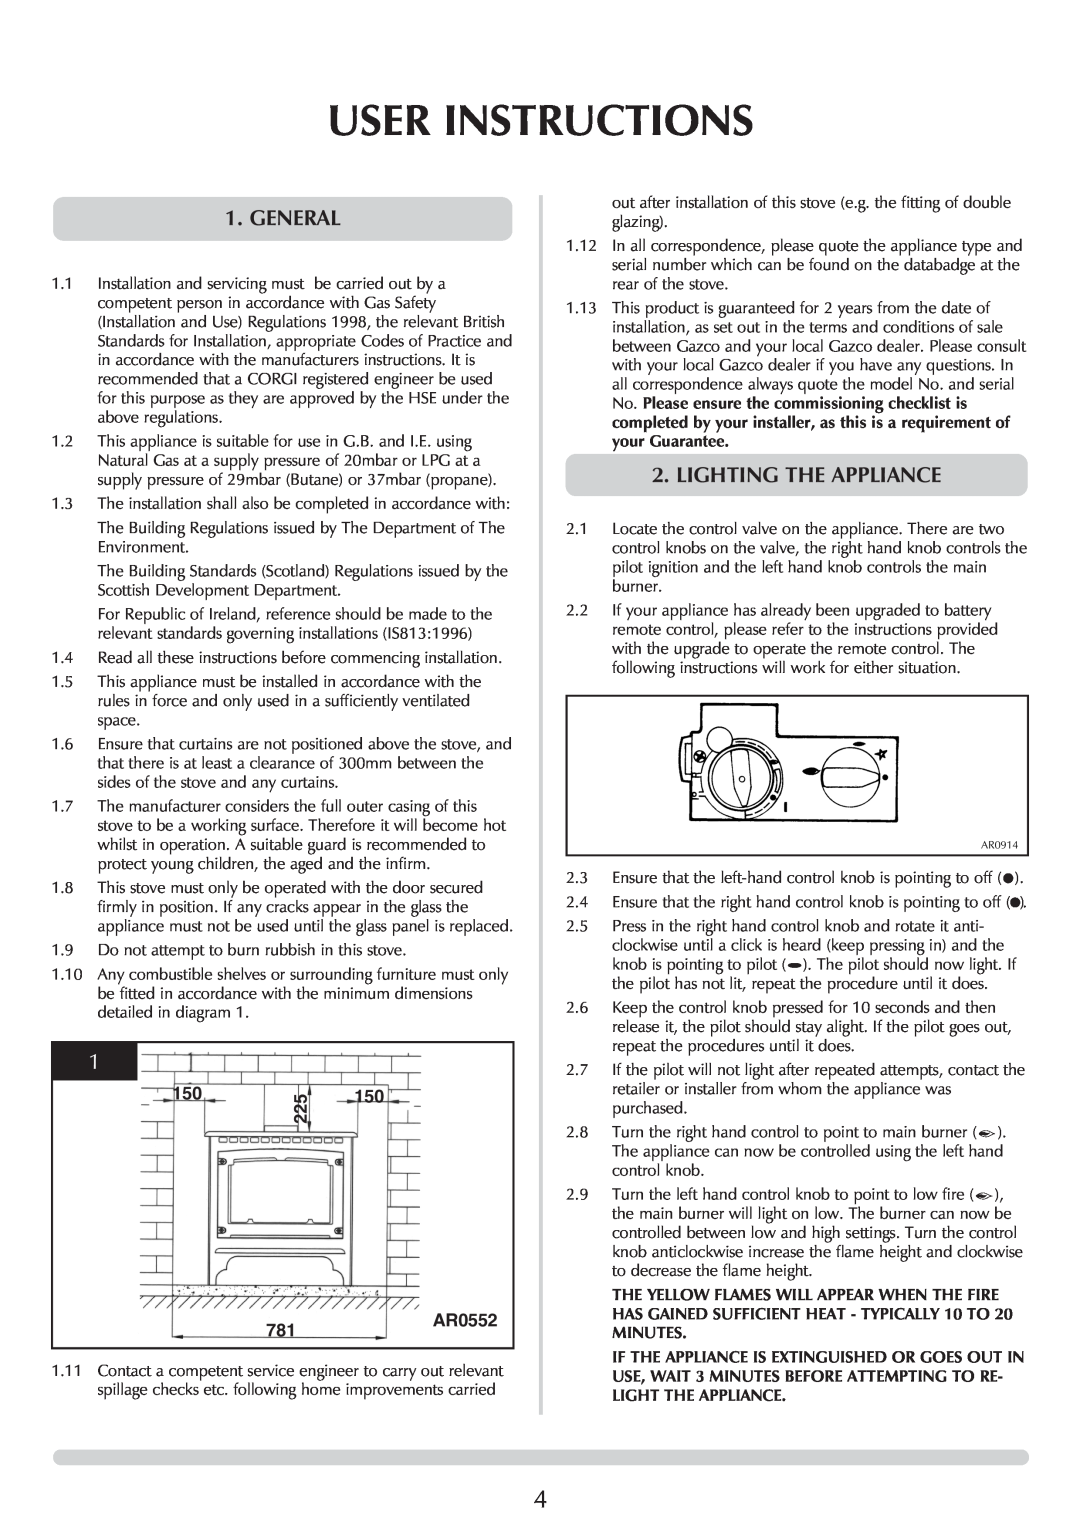 Stovax manual User Instructions, General, Lighting The Appliance, AR0552, Minutes, Light The Appliance 